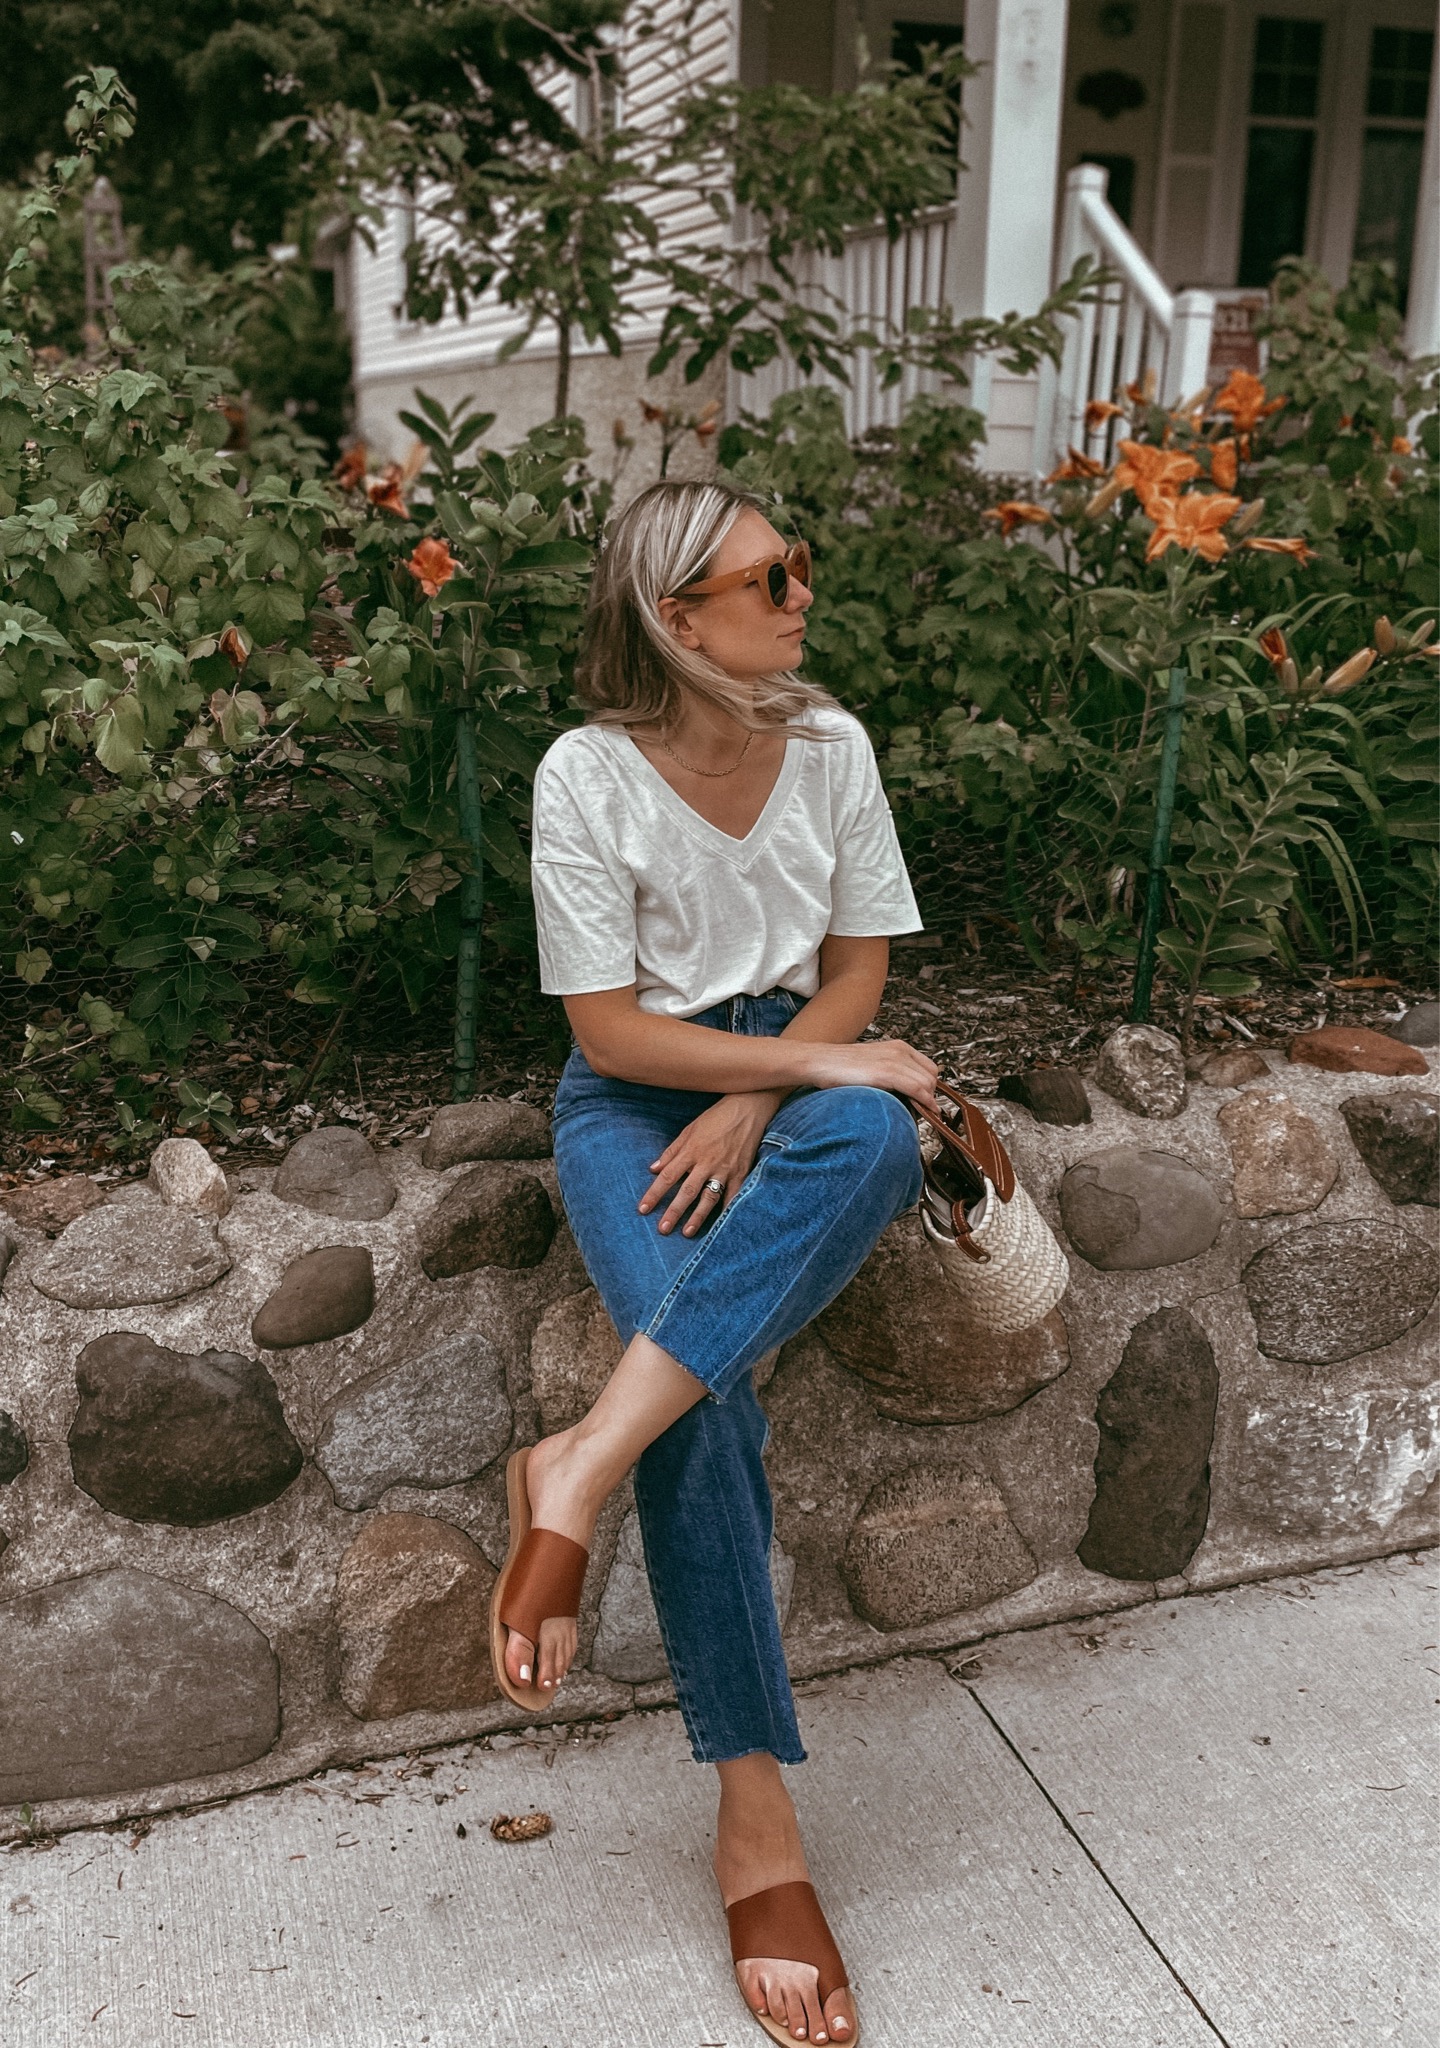 Karin Emily wears her Everlane favorites: a pair of way high jeans and a basic cream tee